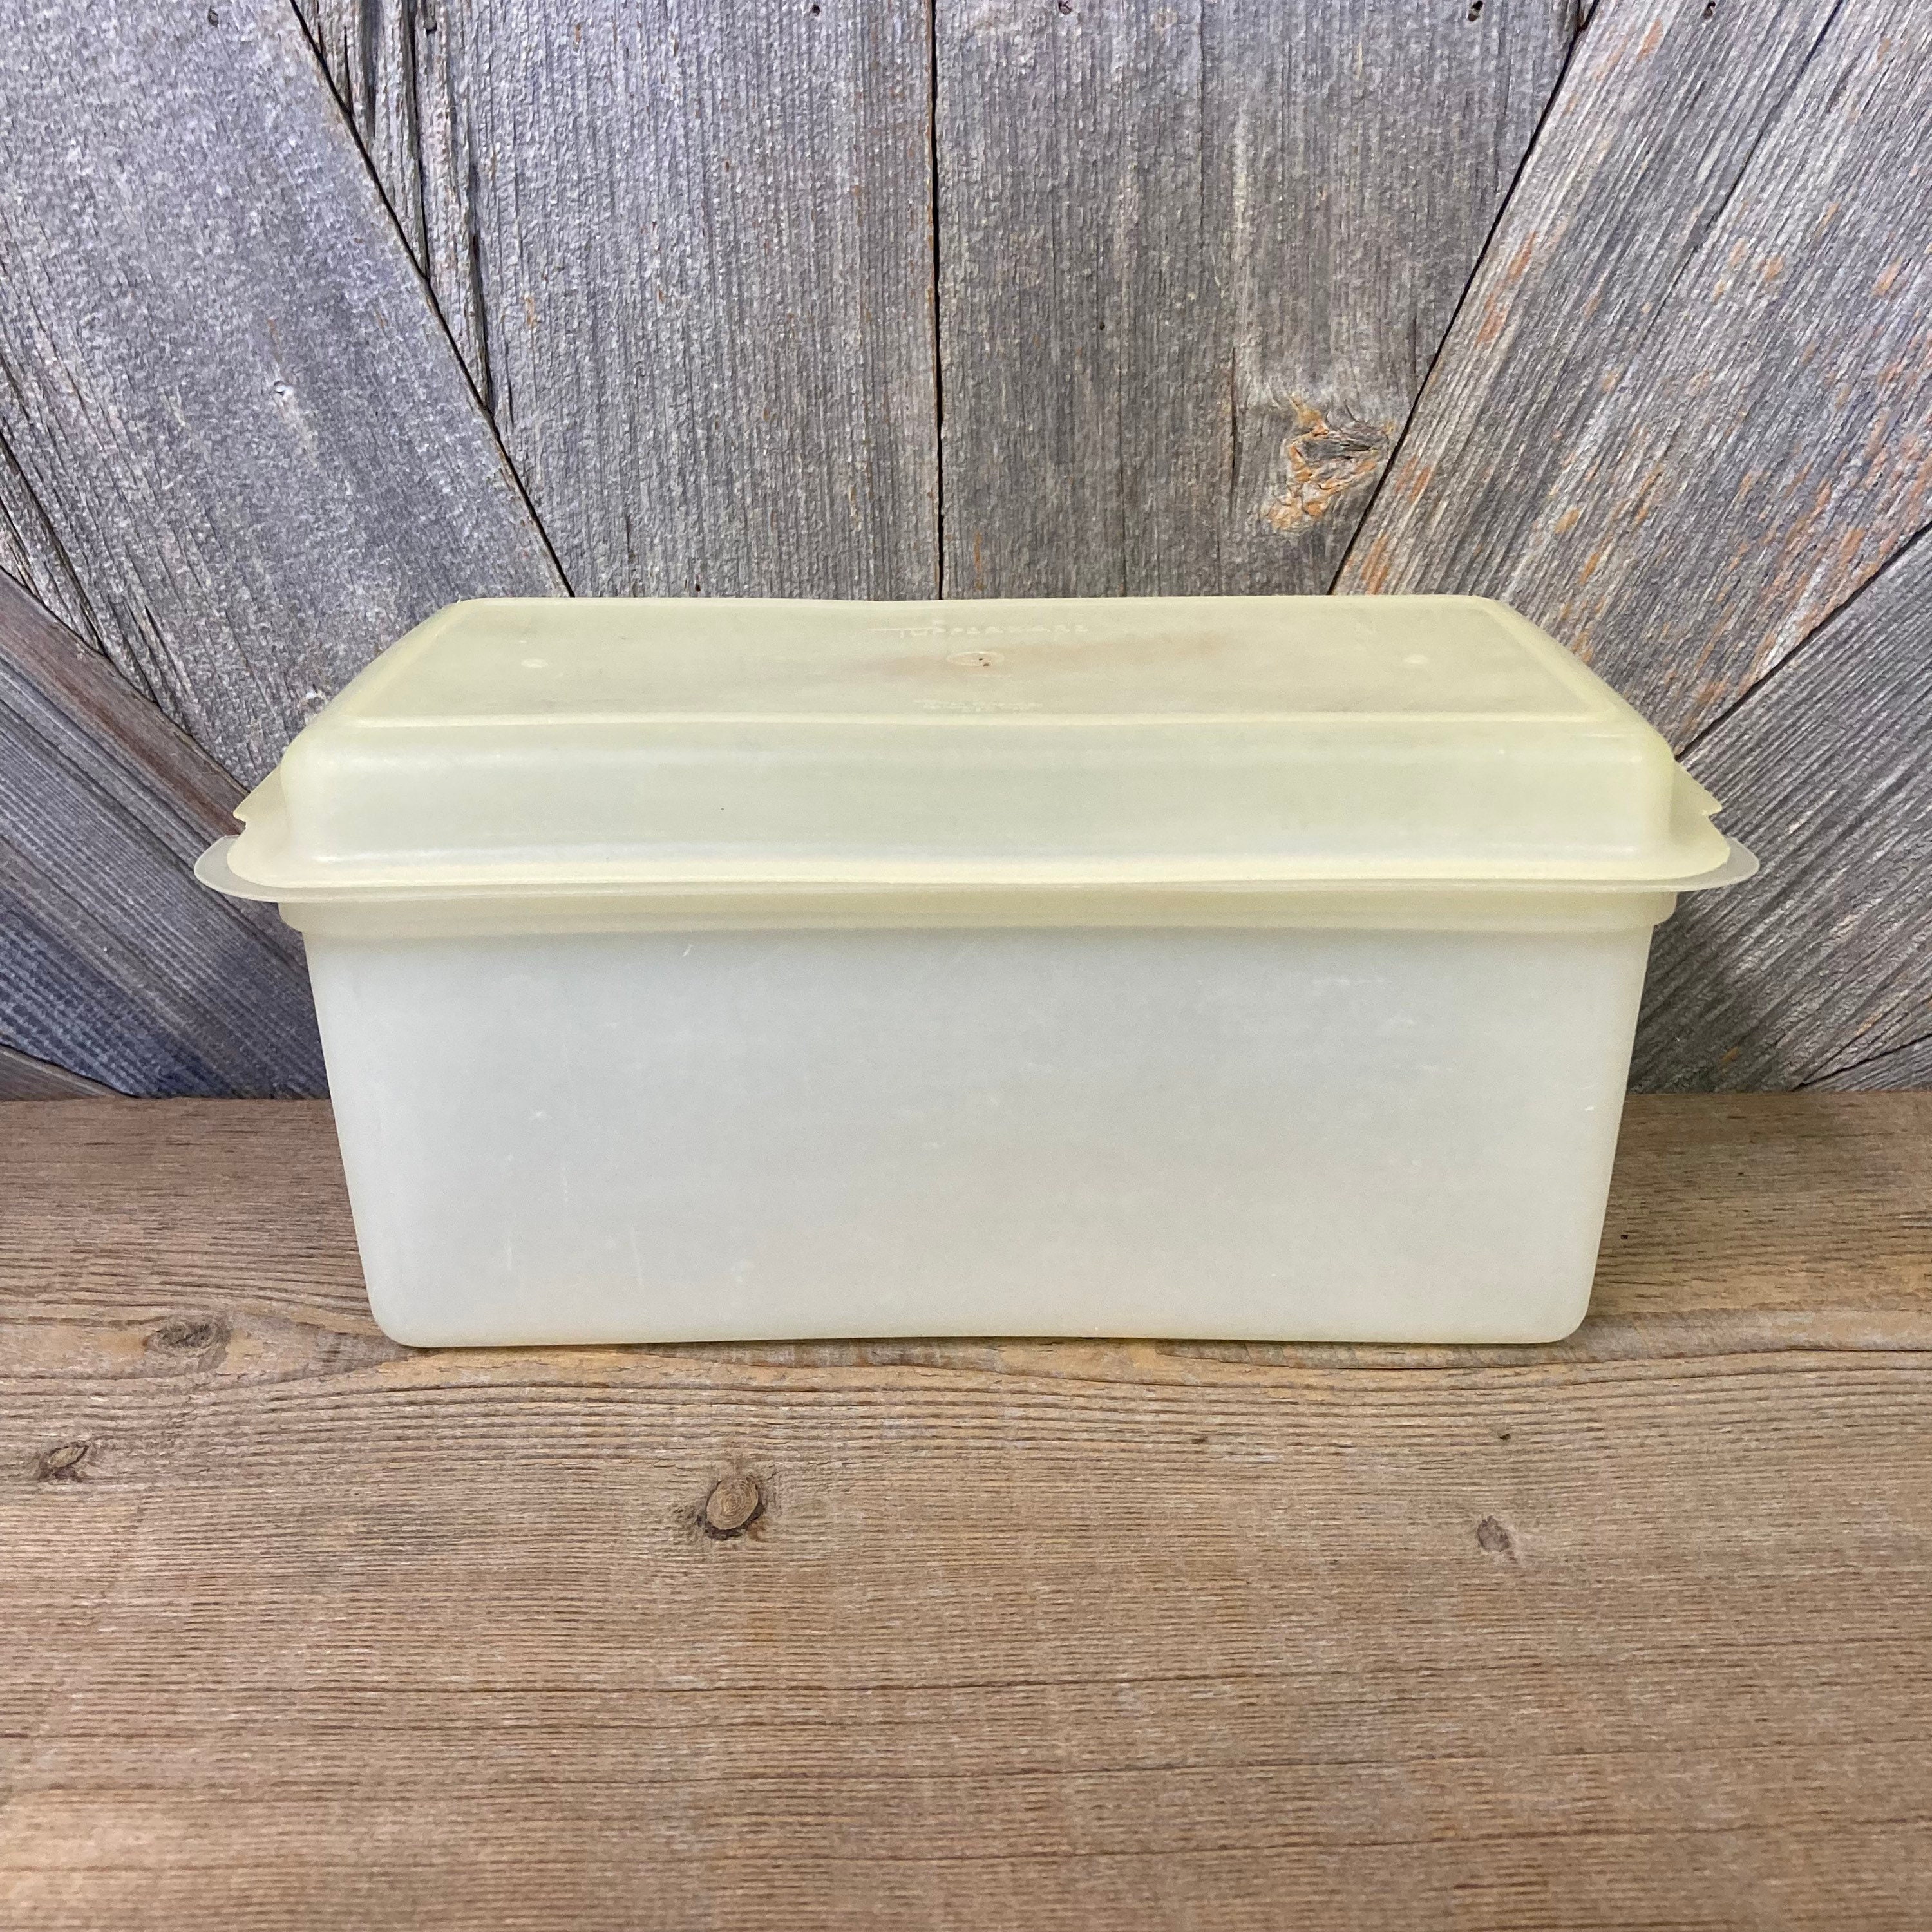 Tupperware Almond 1508-3 Bread Loaf Keeper Storage Container with